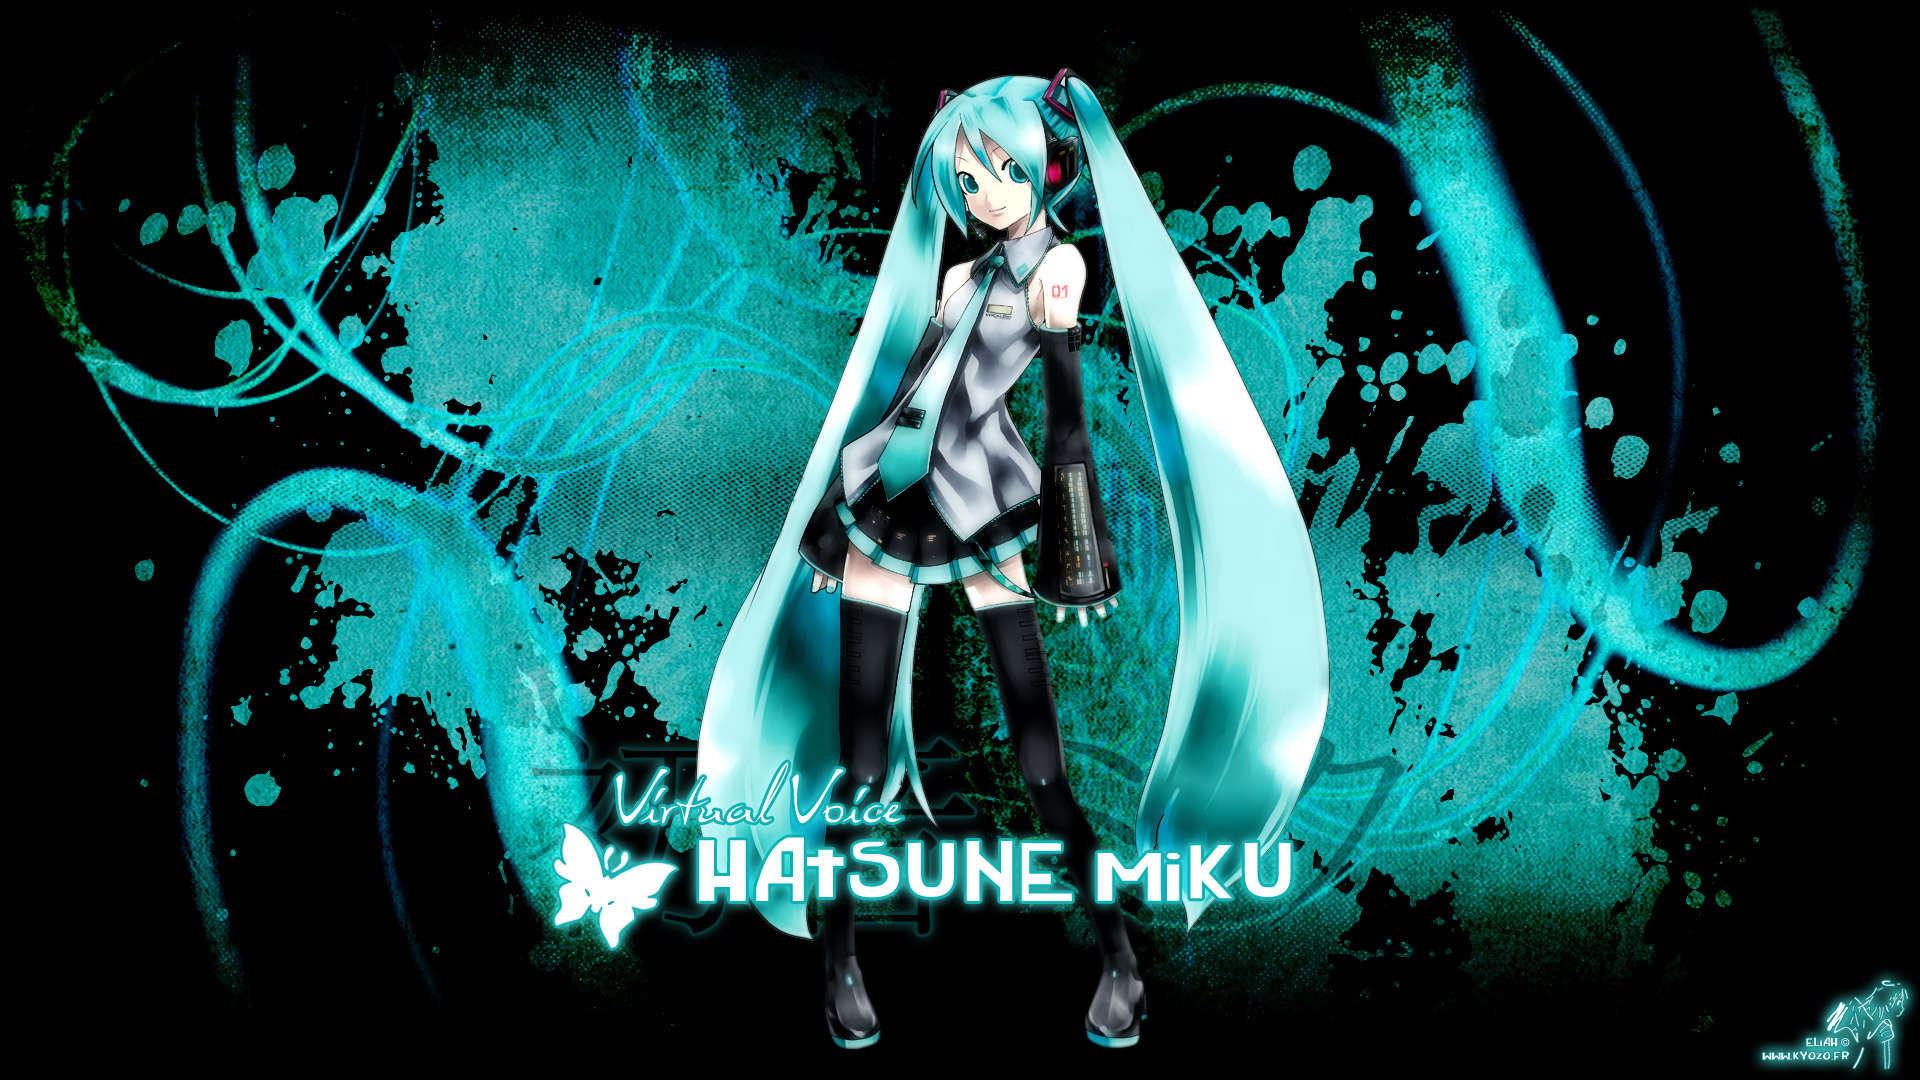 Wallpaper Miku Images amp Pictures   Becuo